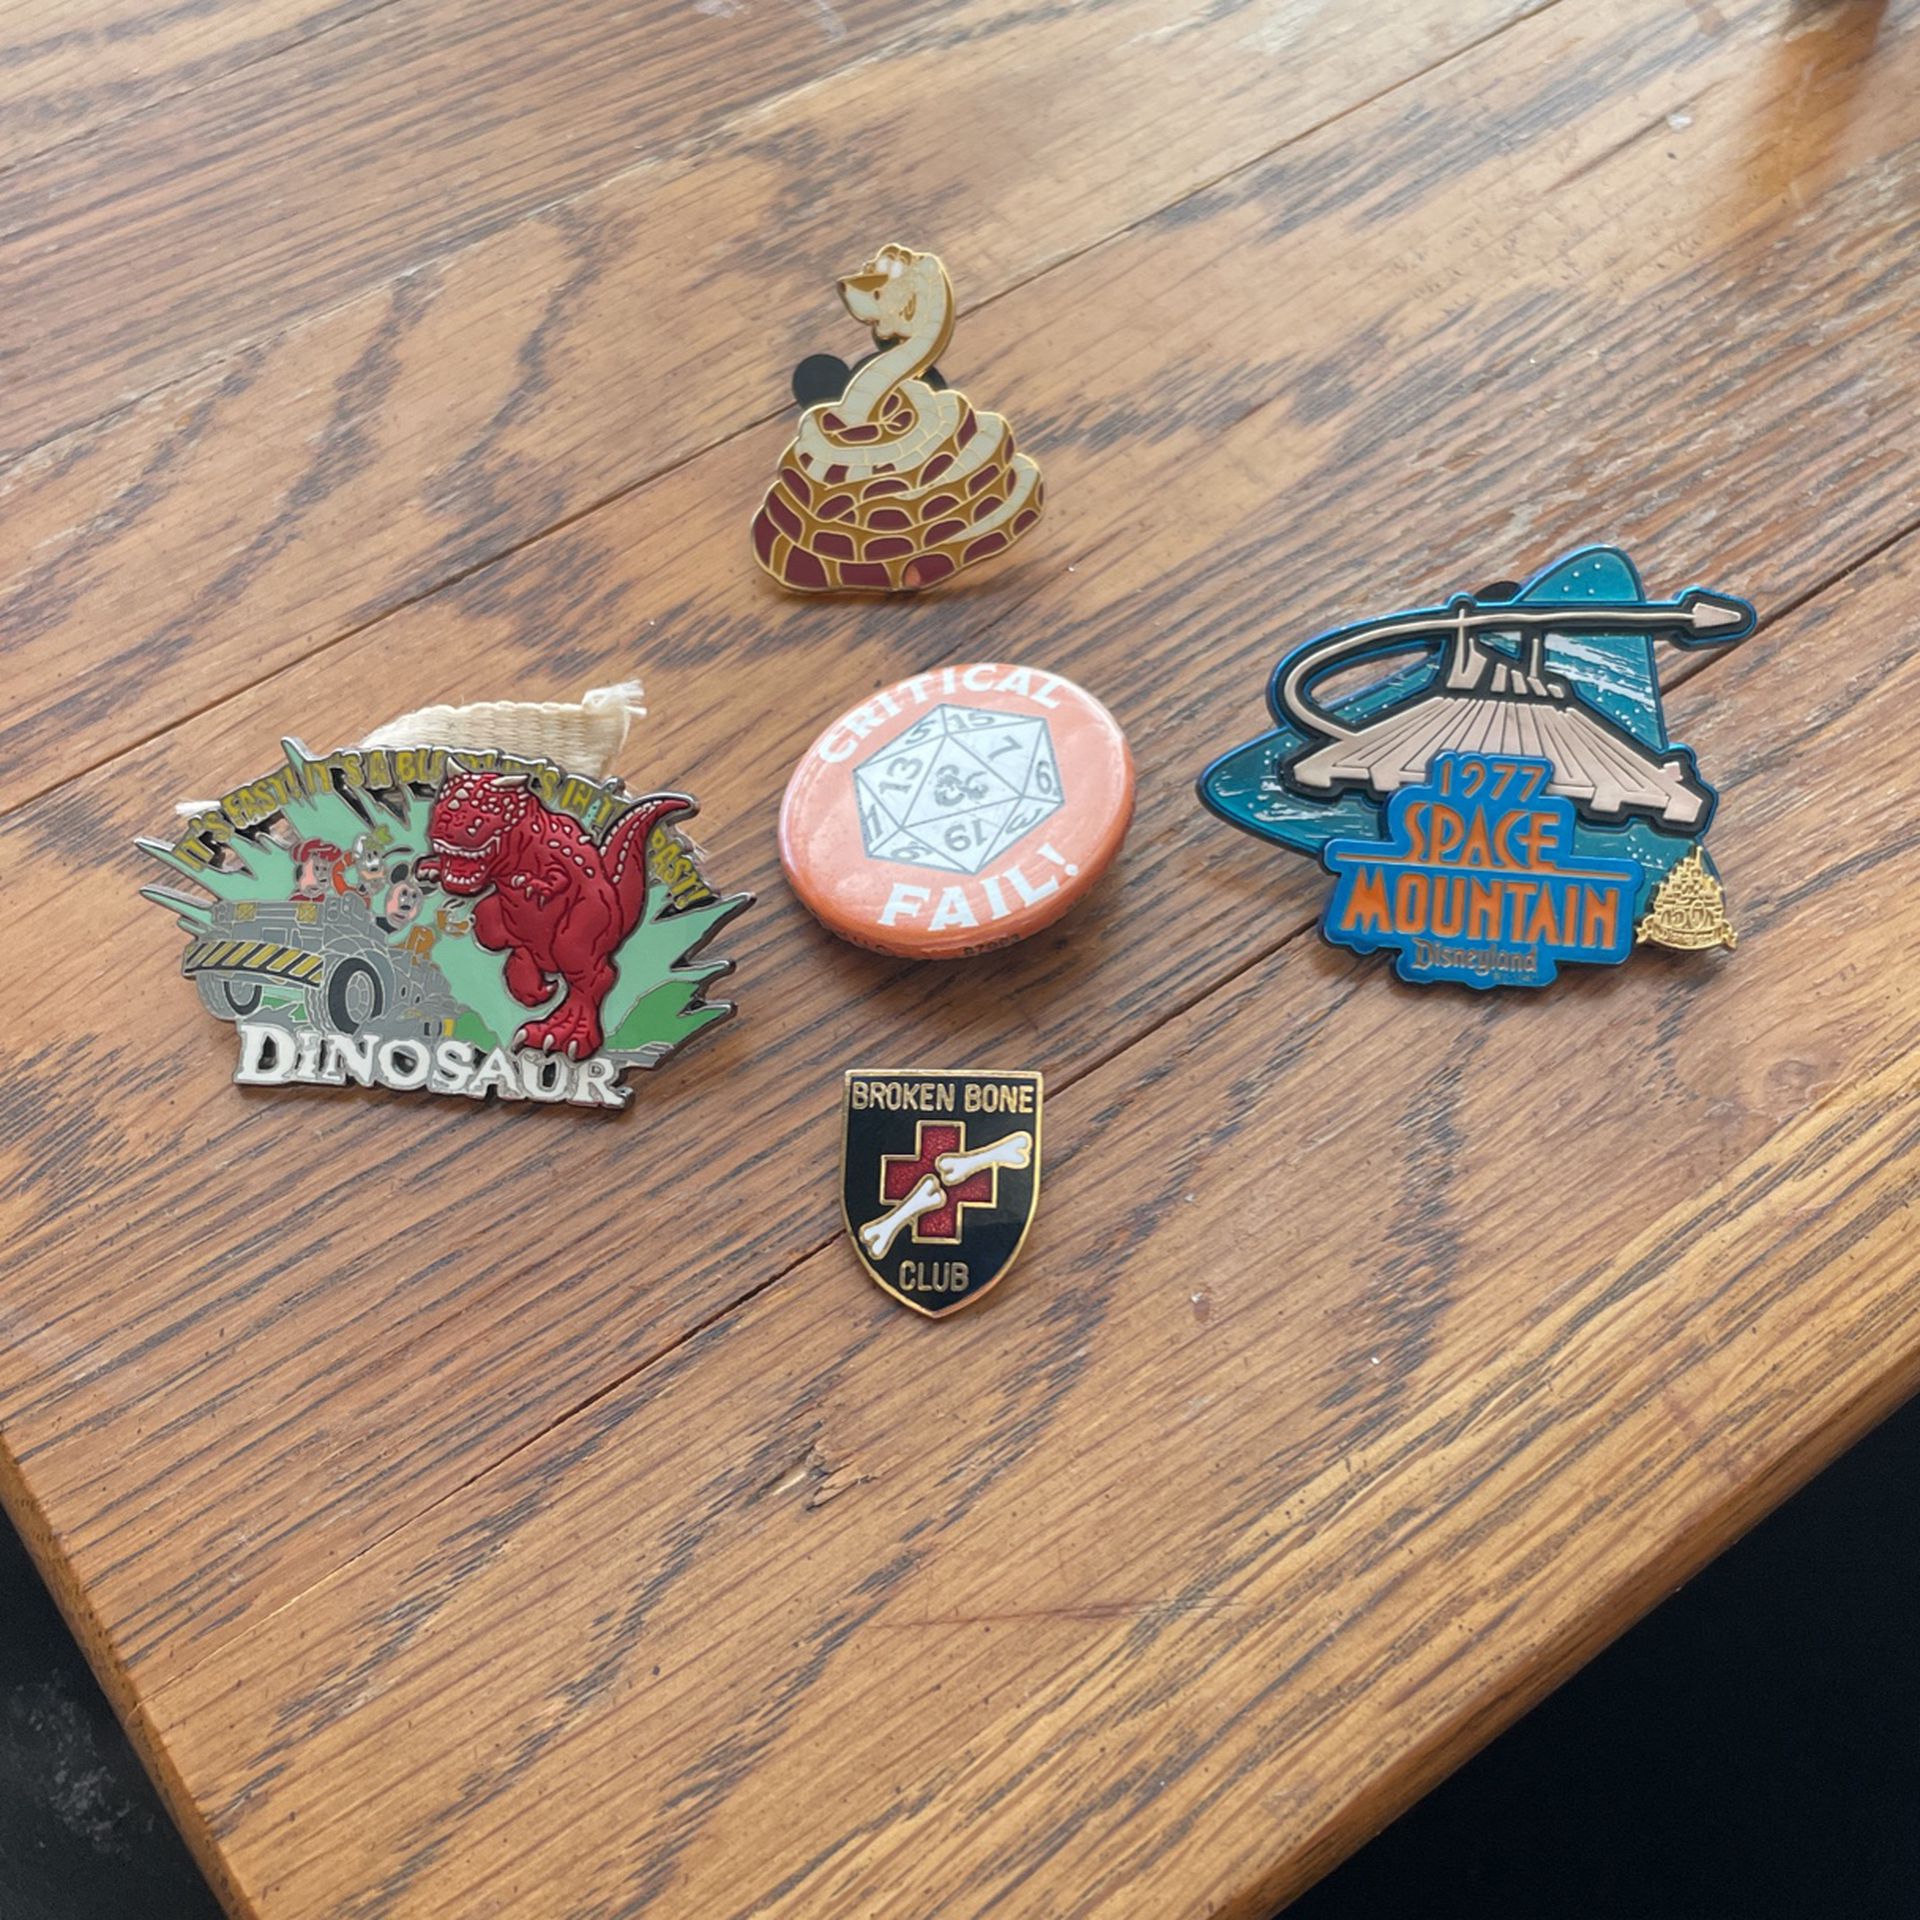 Vintage Pins 1977 Space Mountain, Dungeon And Dragons Etc.